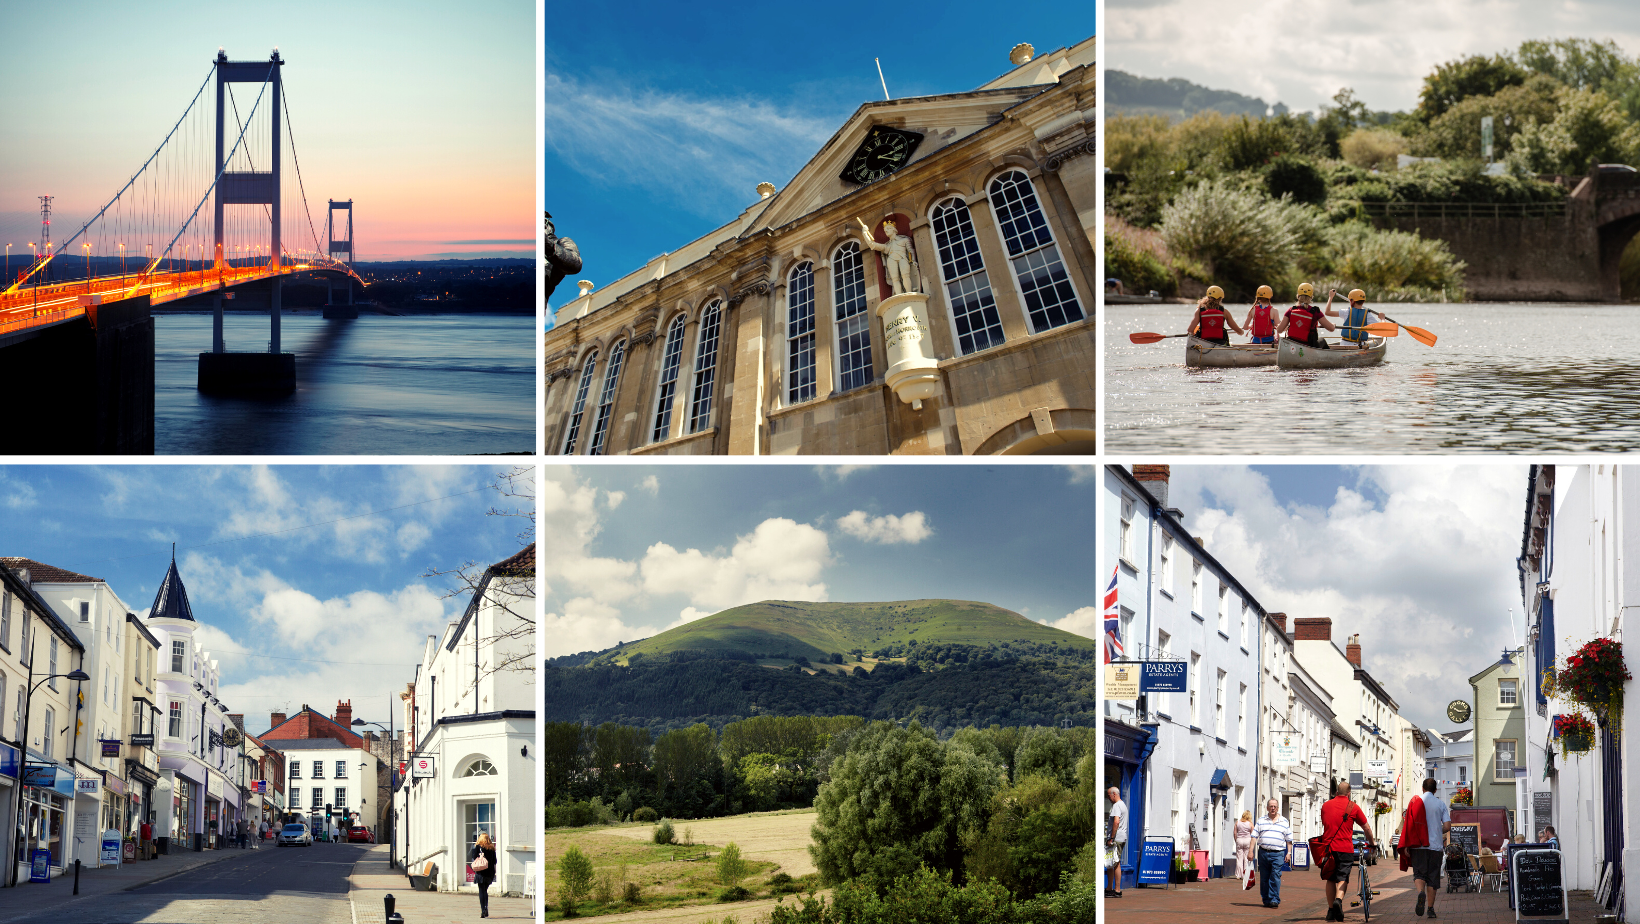 a Photo collage of places in monmouthshire including, the severn bridge, Shire hall, Wye River, the blorenge mountain and Abergavenny and chepstow high streets